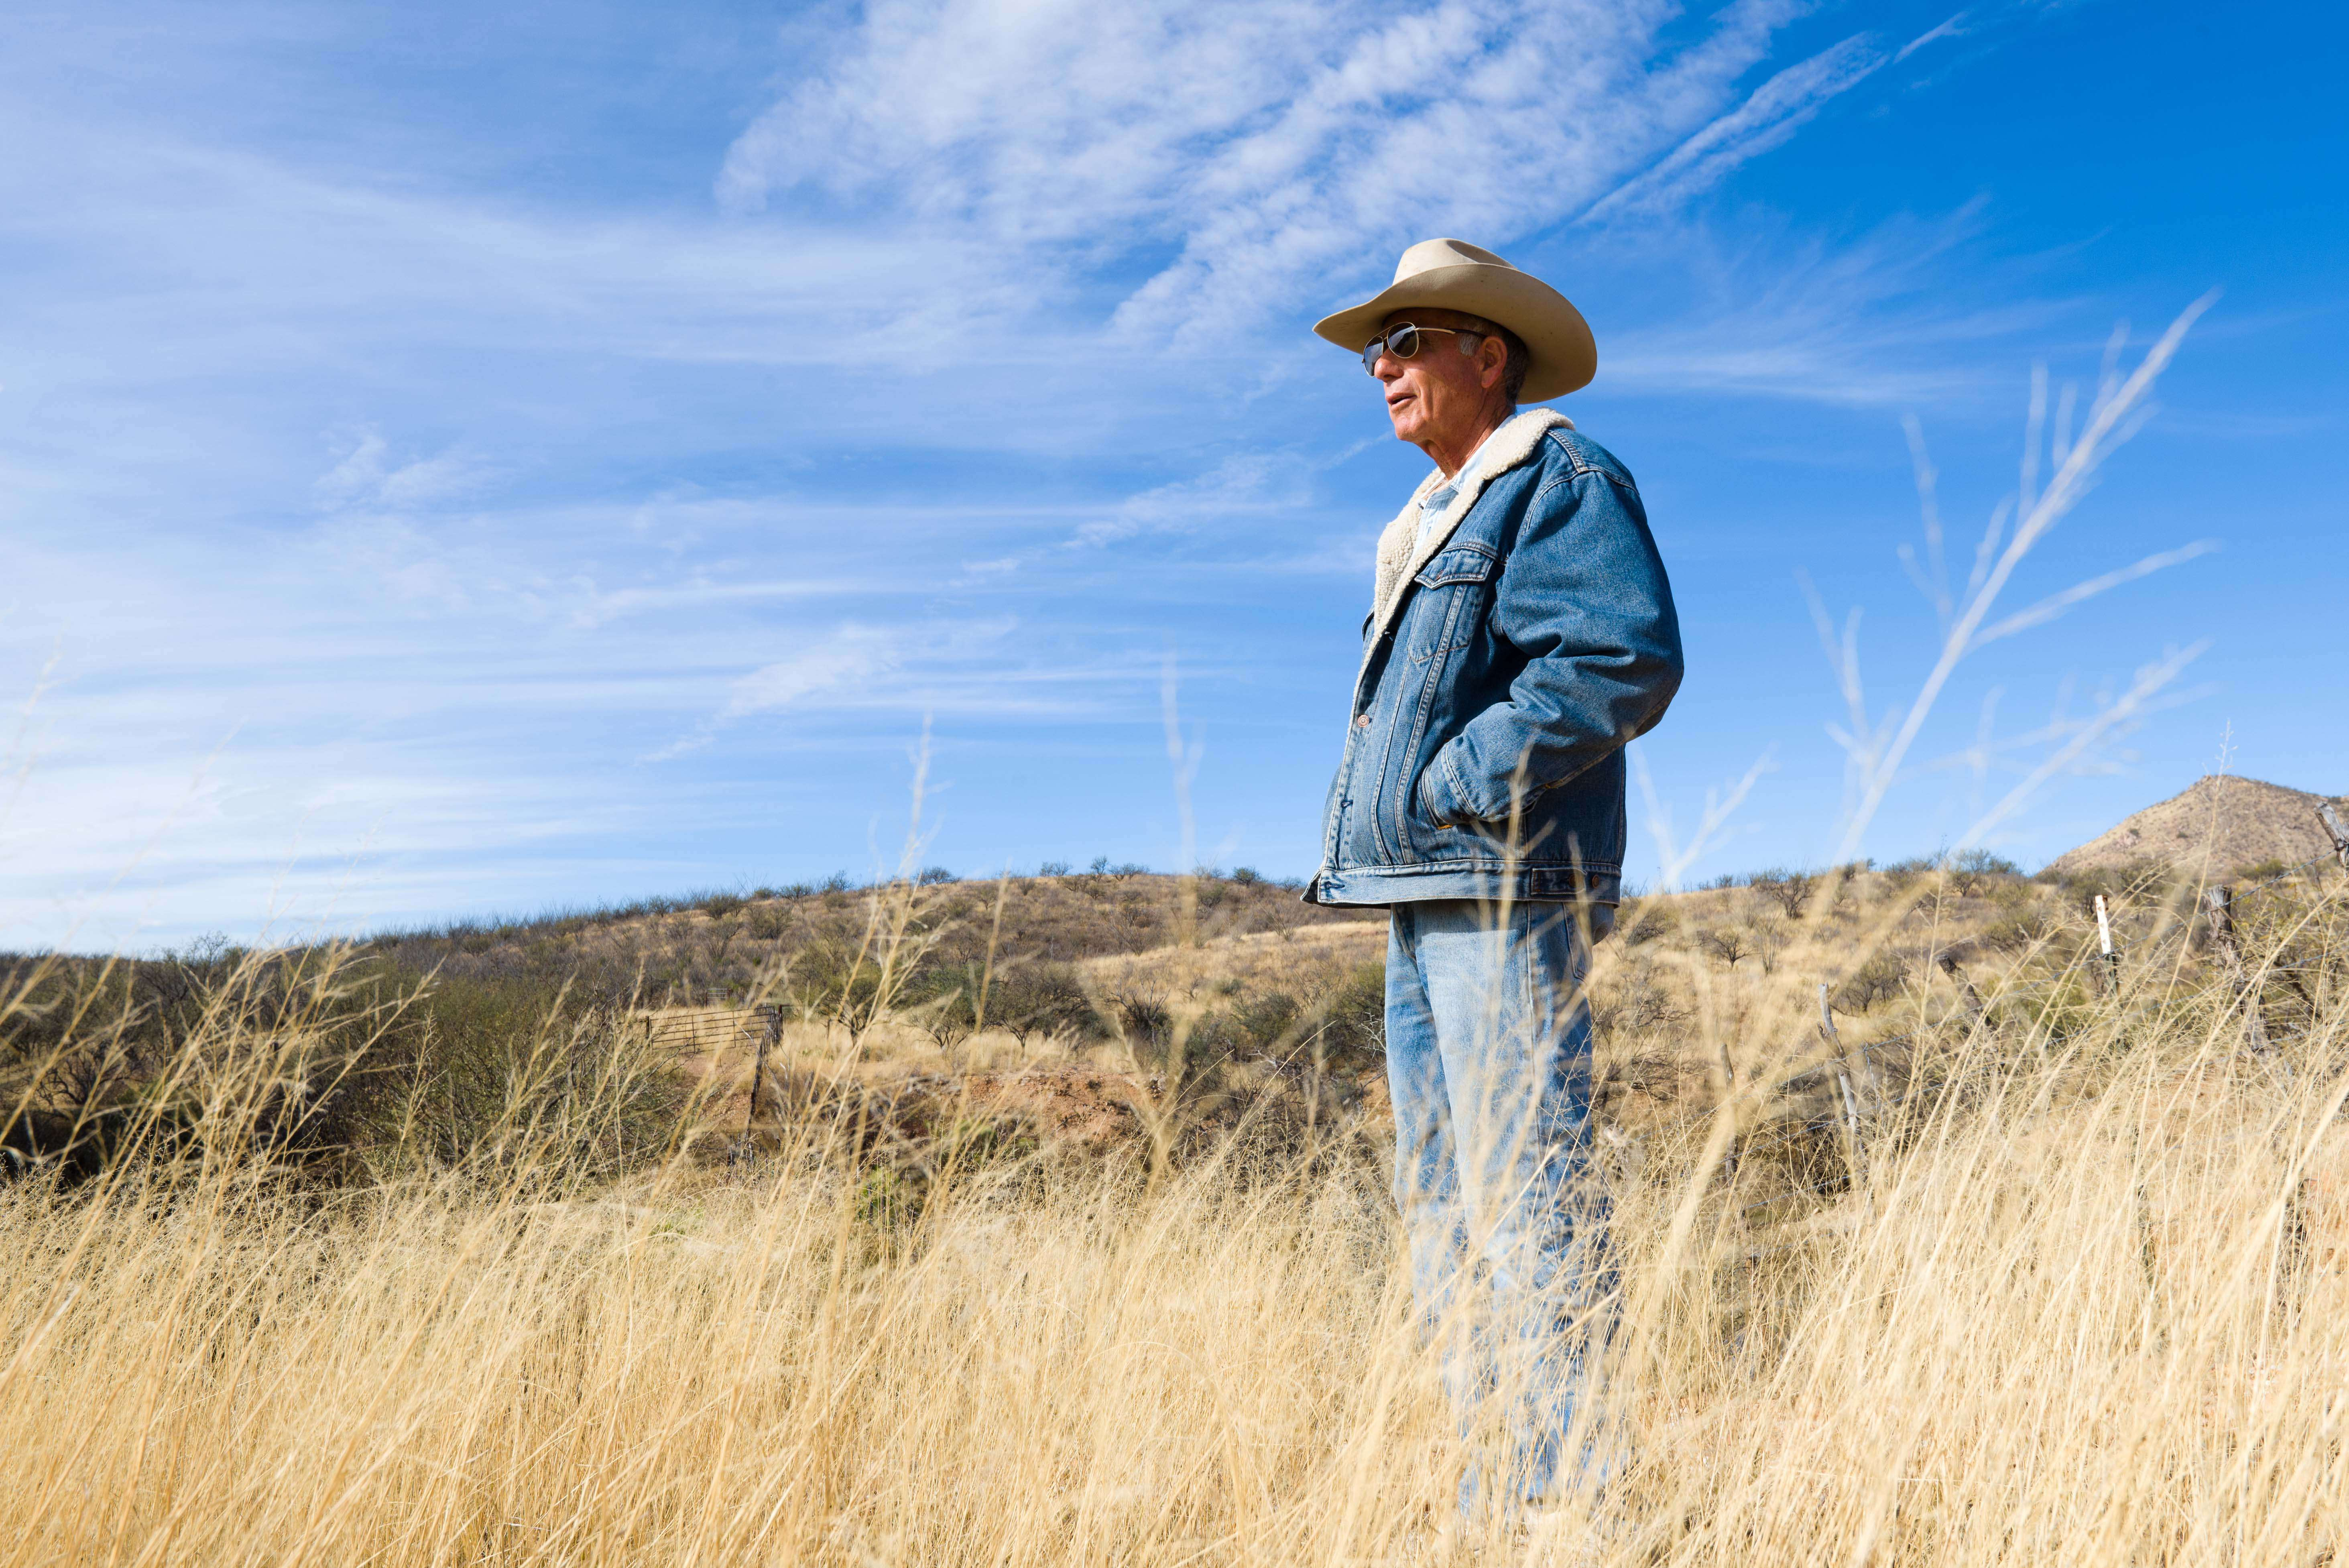 Rancher Tom Kay has spent 12 years trying to increase grass  productivity on his ranch.  Success has been slow under the current drought condiions.